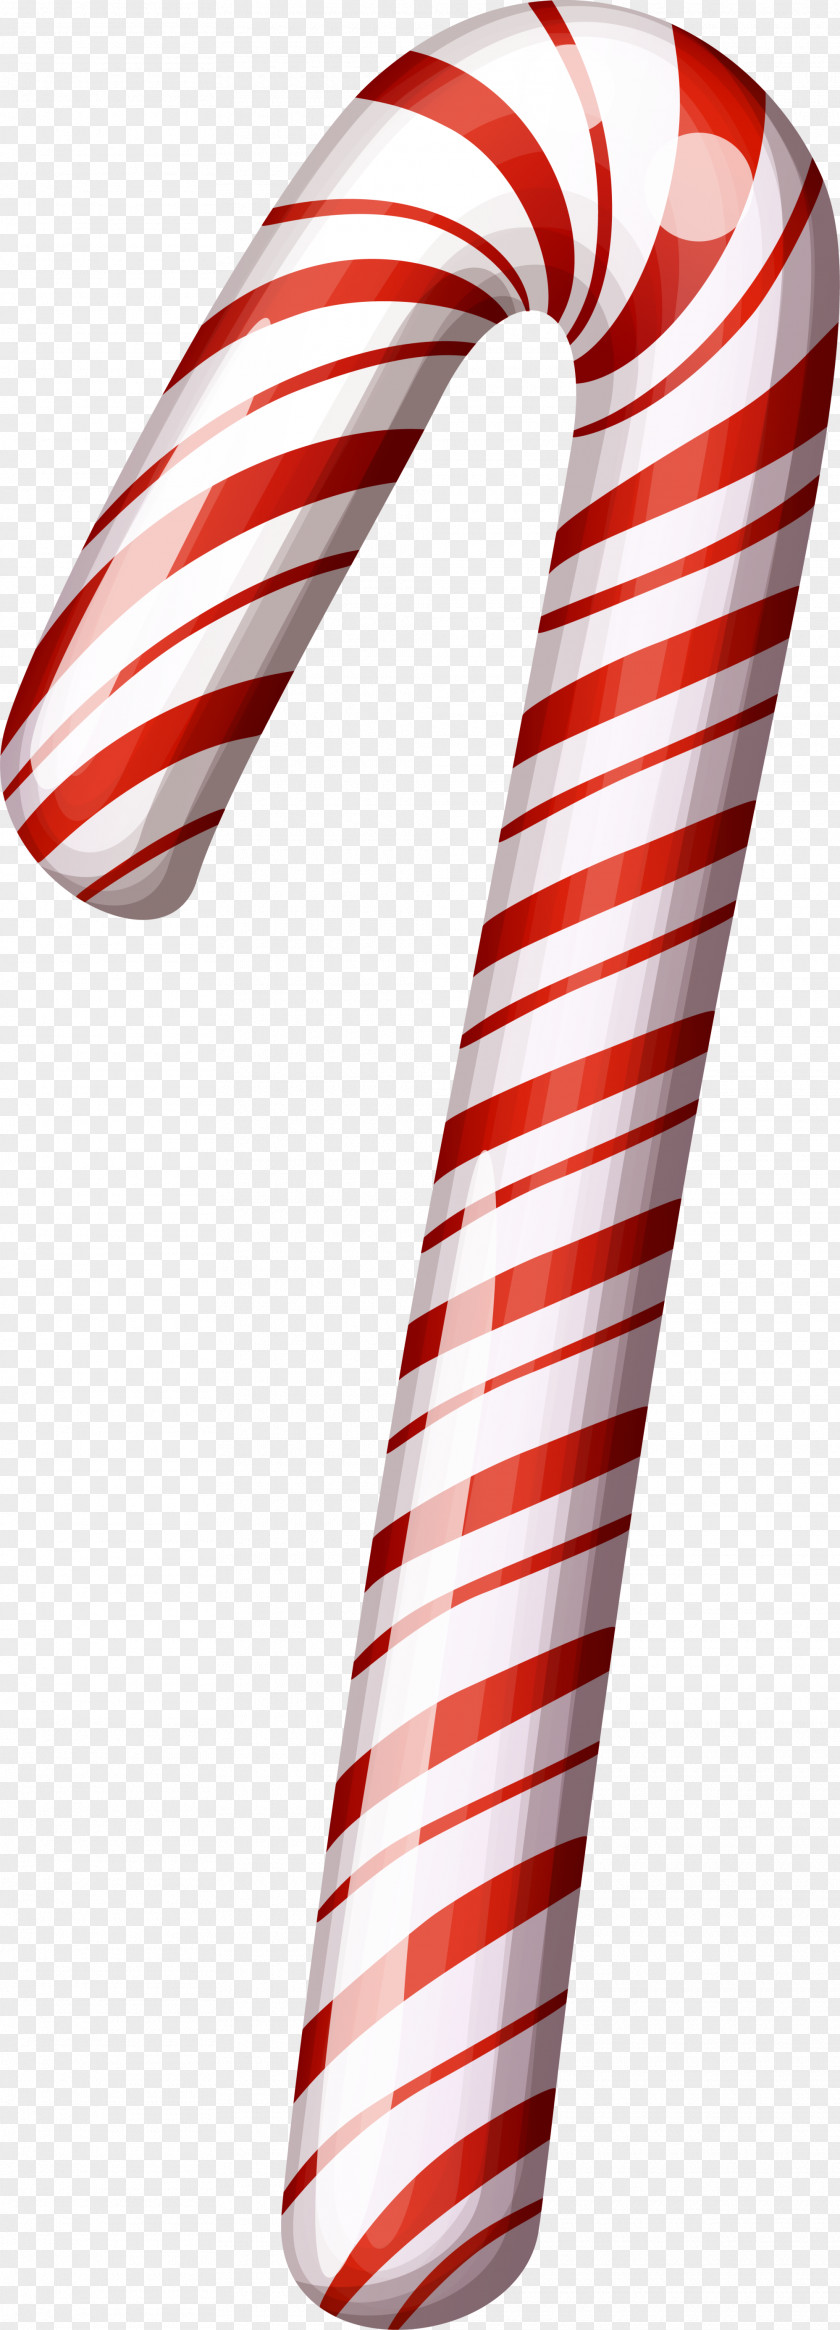 Red Cartoon Cane Candy Polkagris Animation PNG